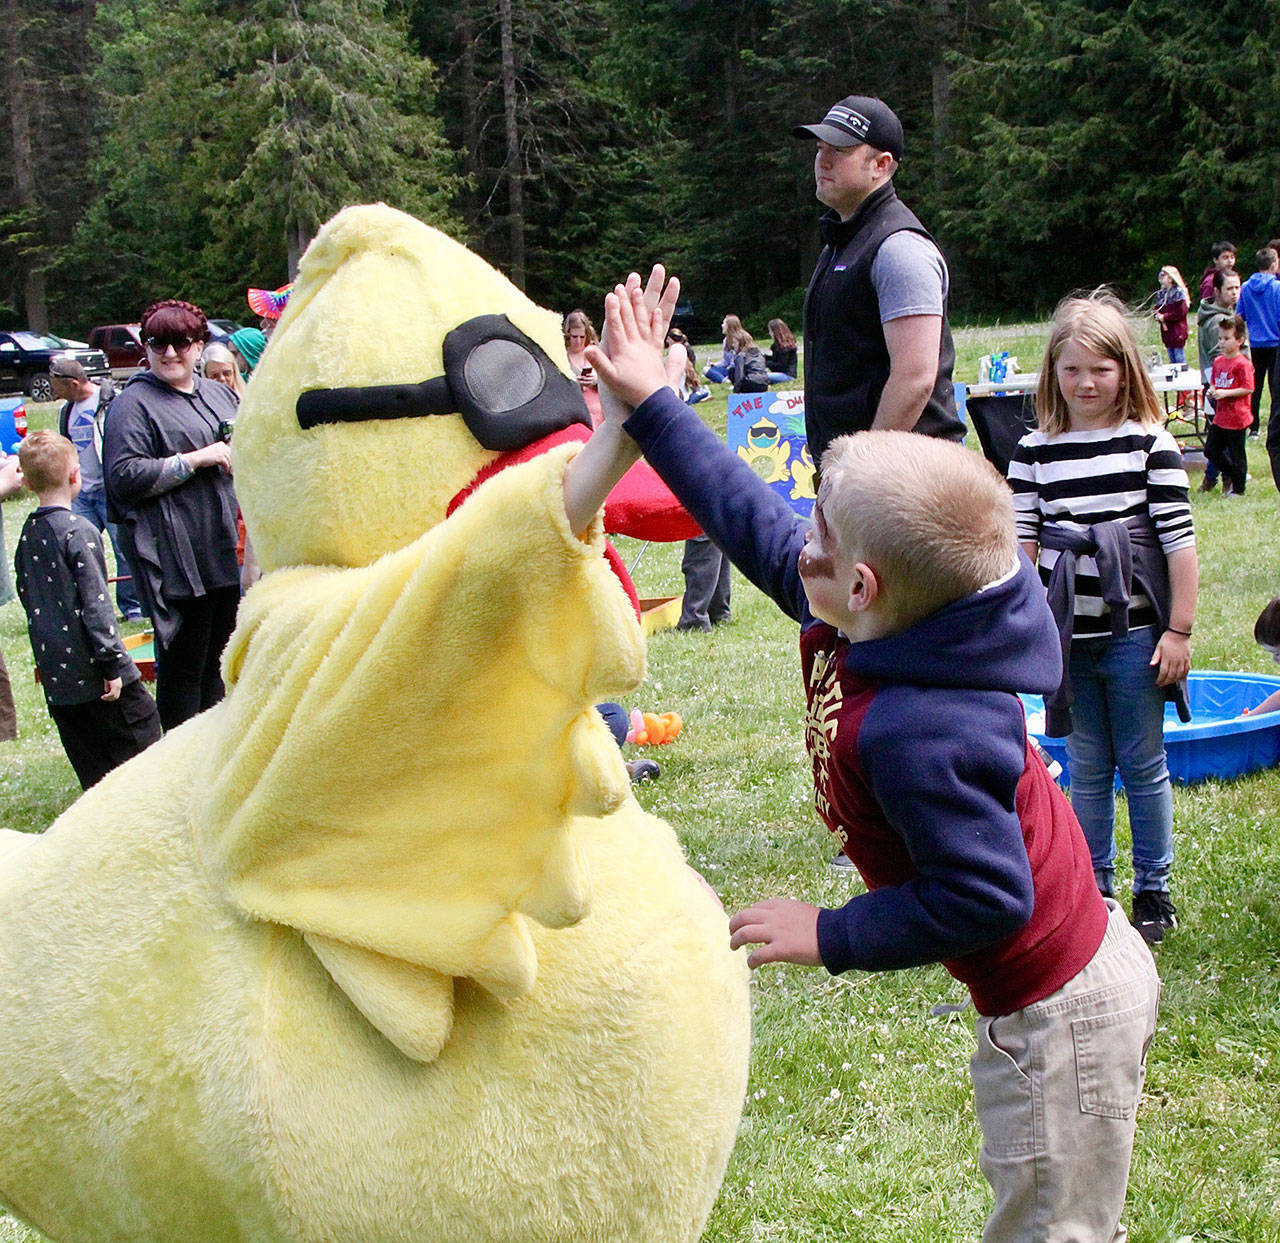 Isaiah Young, age 6, gets a high five from the Duck Derby mascot Sunday. (Dave Logan/for Peninsula Daily News)